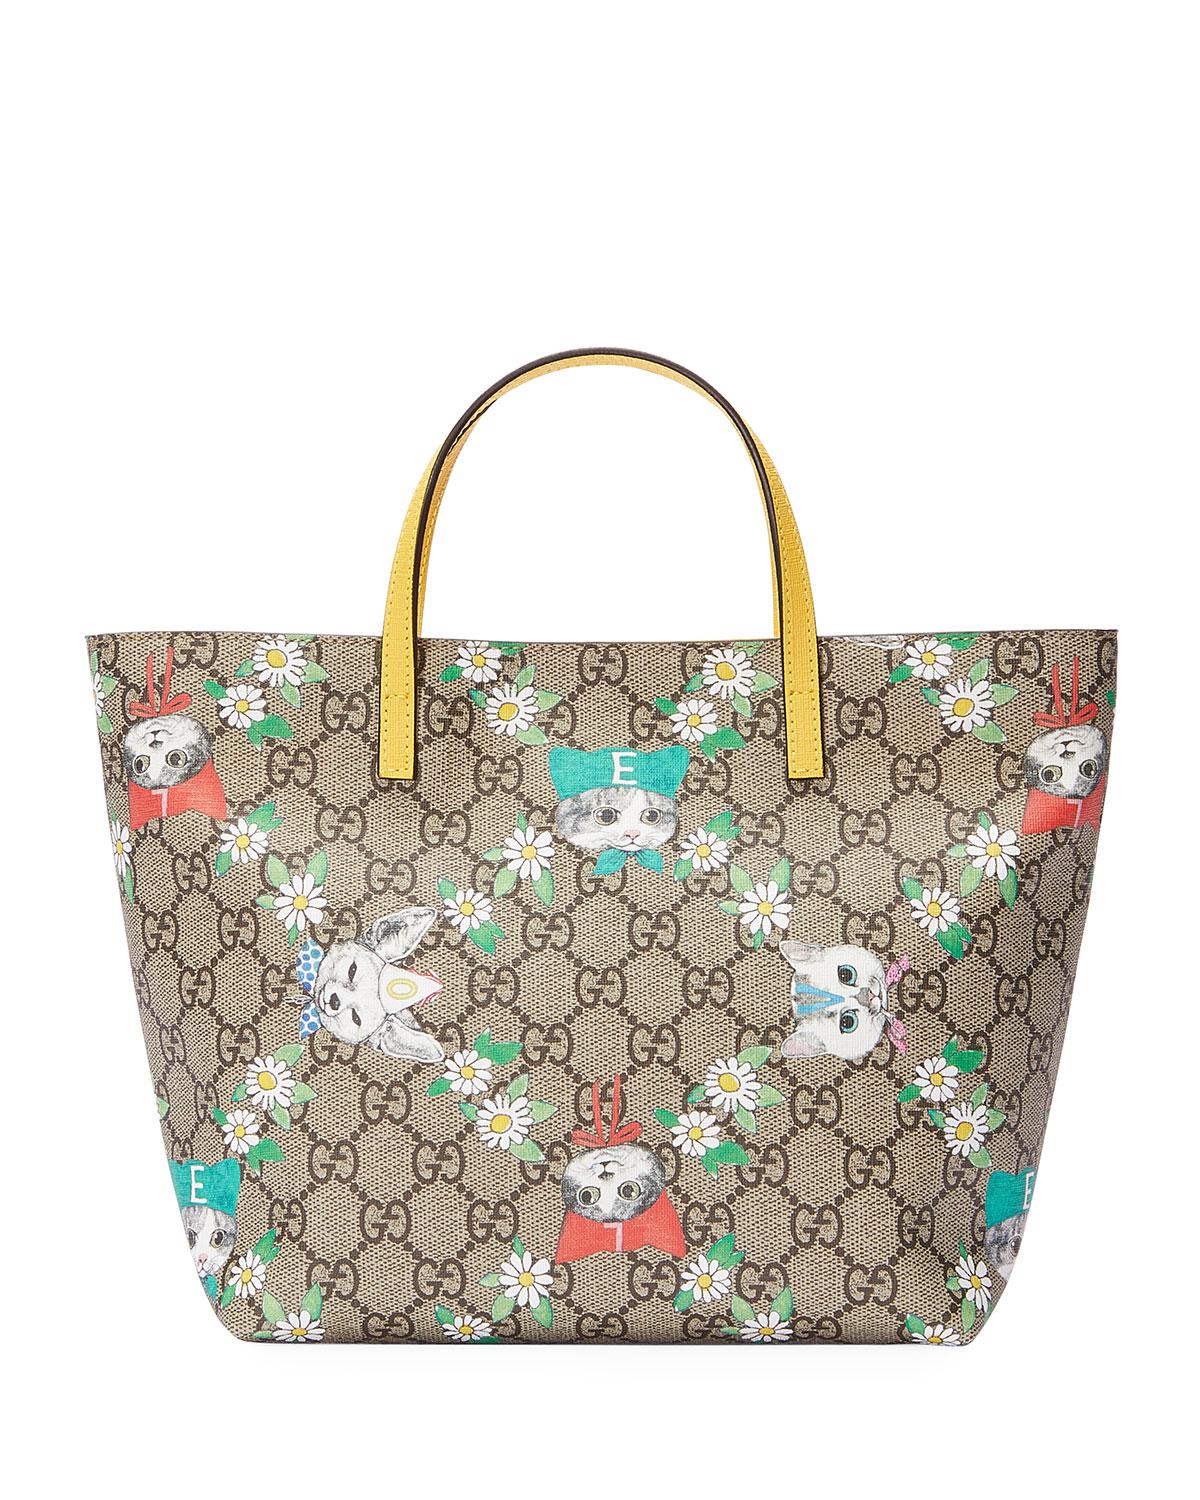 Gucci Leather Girls&#39; Gg Supreme Pets Tote Bag in Beige (Natural) - Lyst